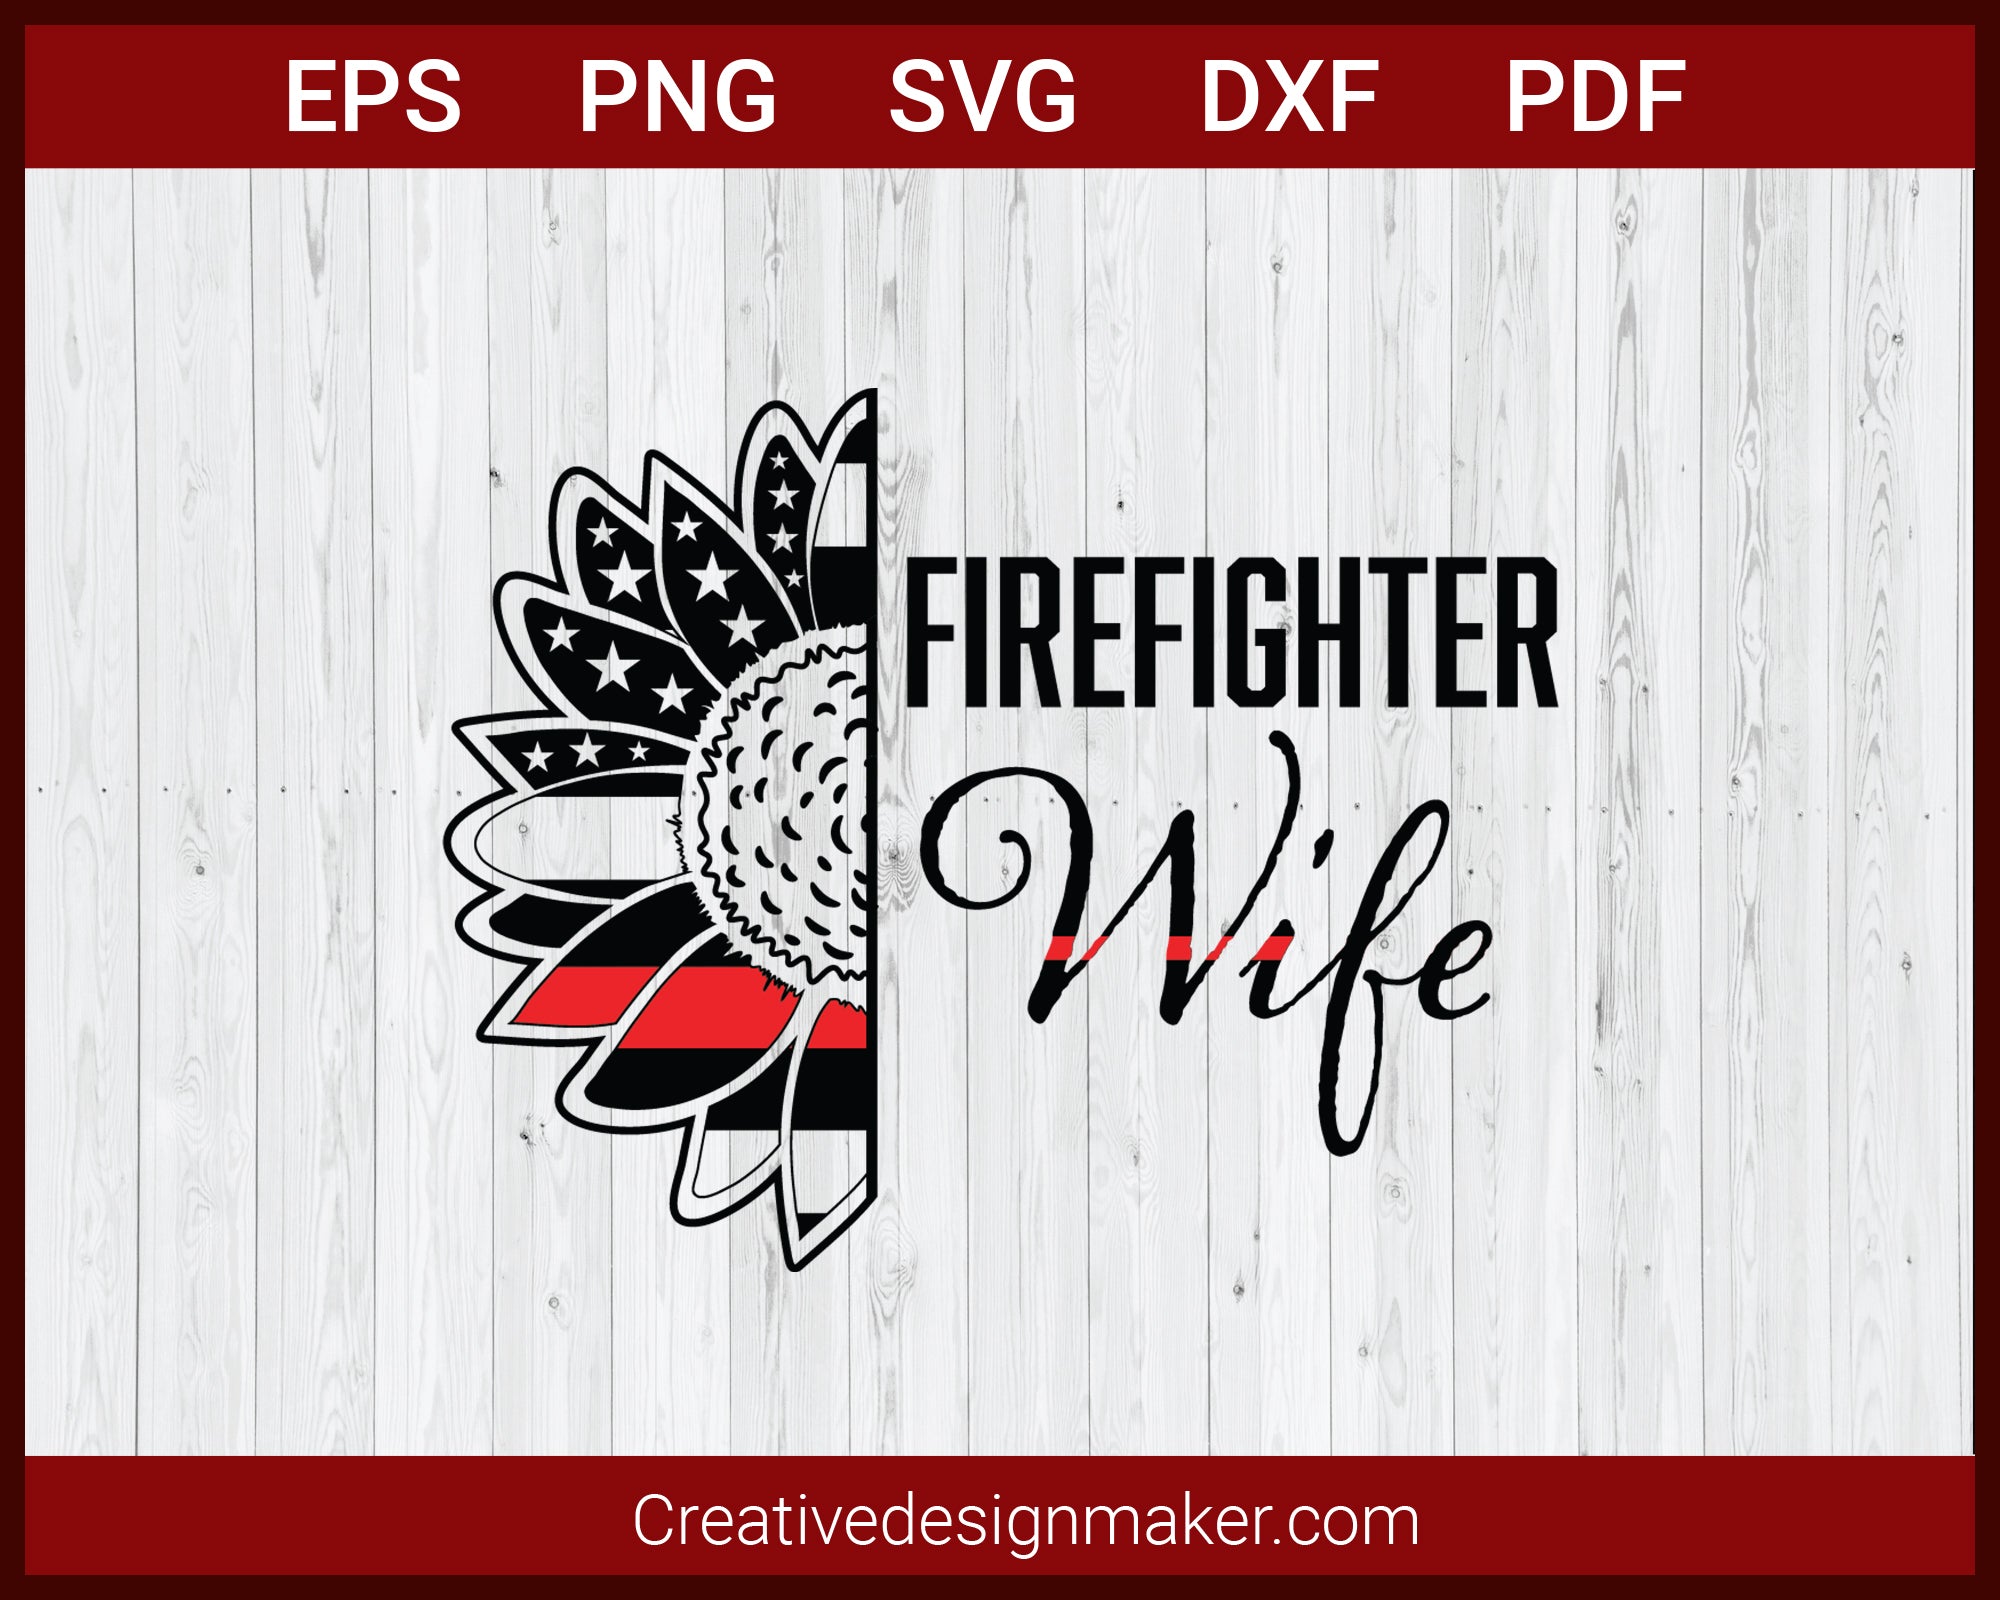 Firefighter Wife Thin Red Line Sunflower SVG Cricut Silhouette DXF PNG EPS Cut File